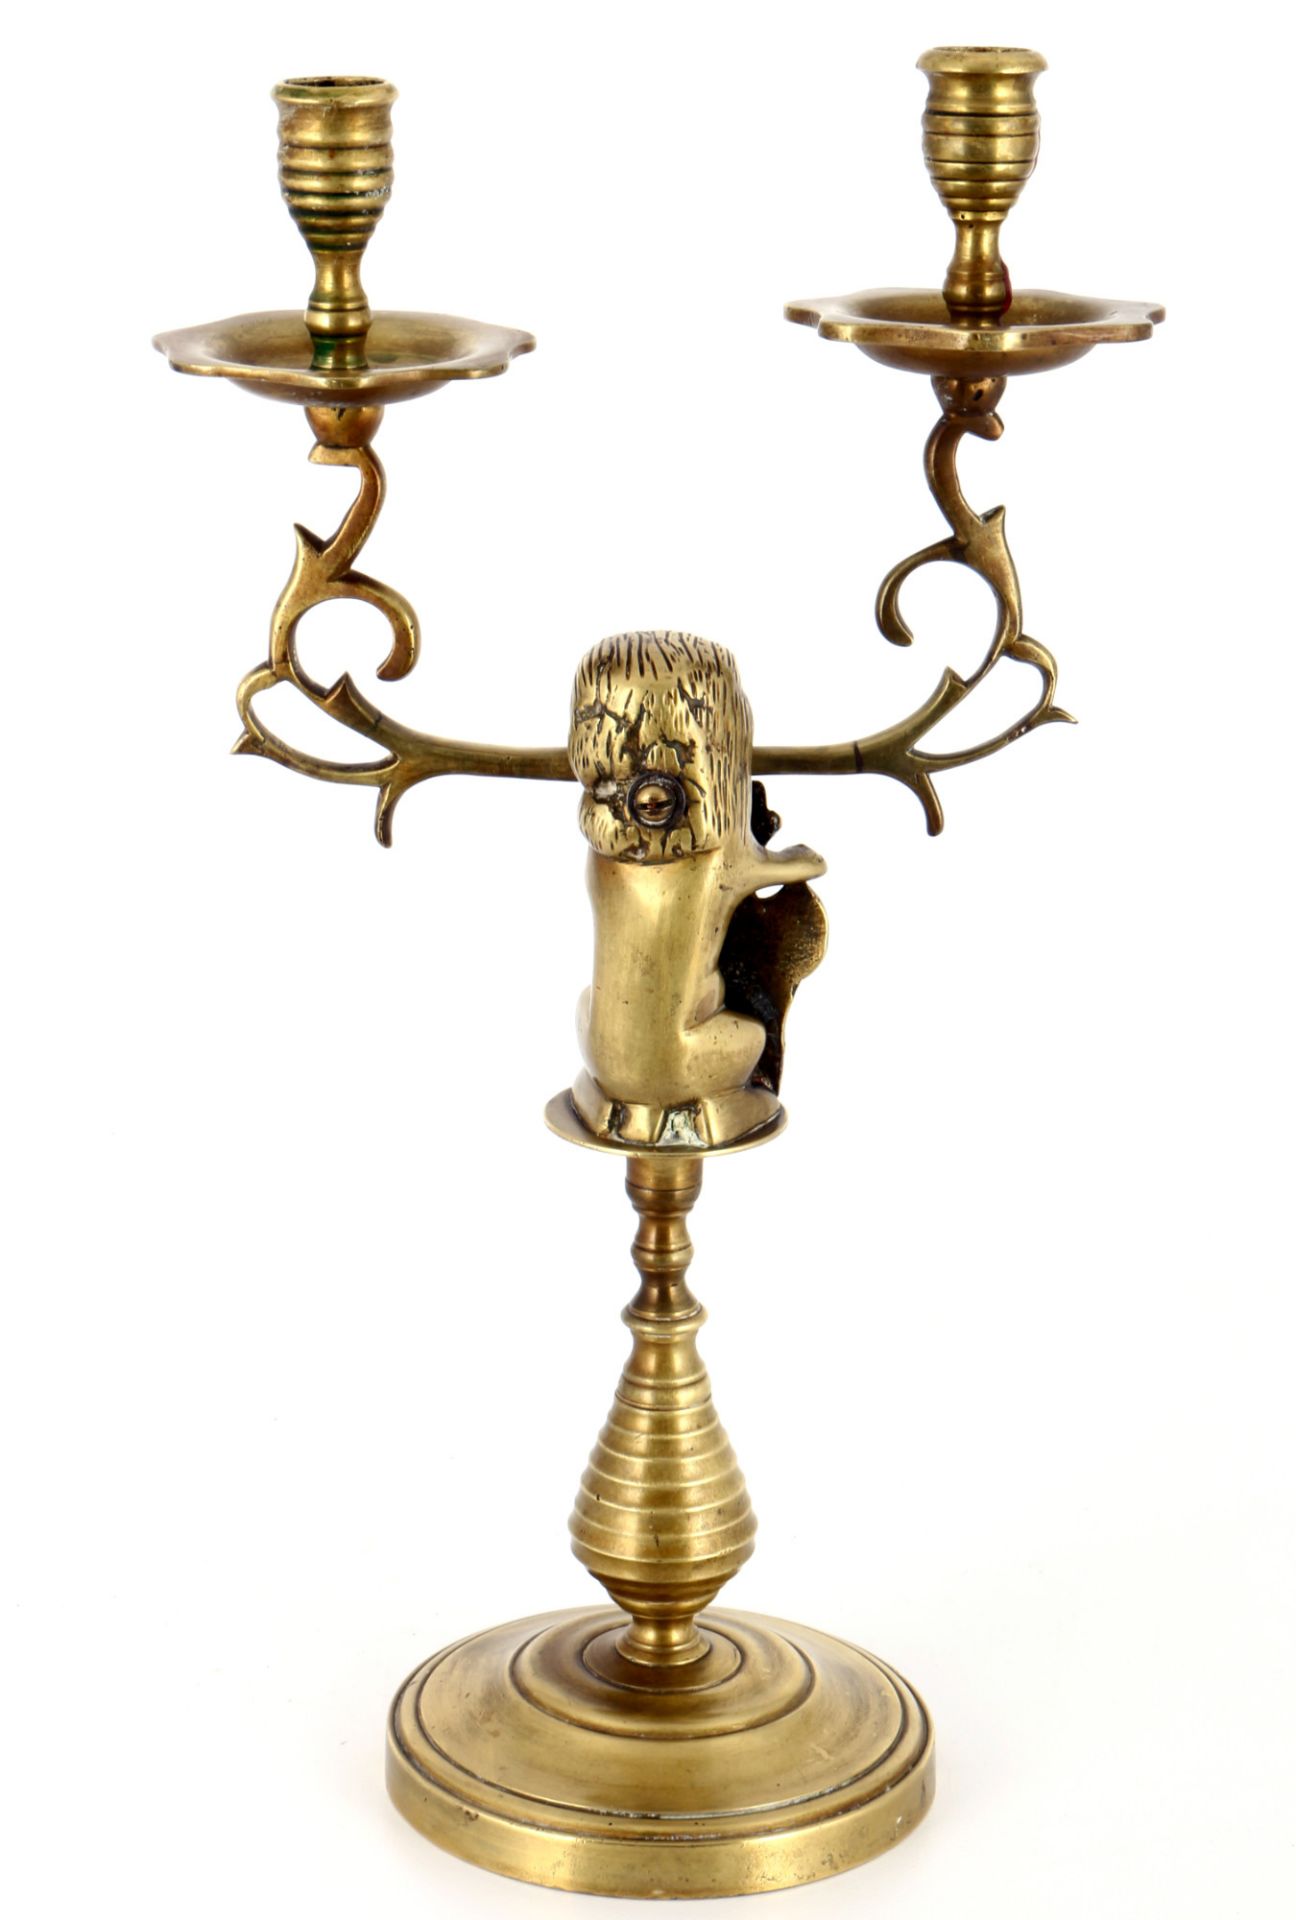 Amsterdam brass candlestick with city coat of arms around 1930, Messingleuchter mit Stadtwappen - Image 3 of 6